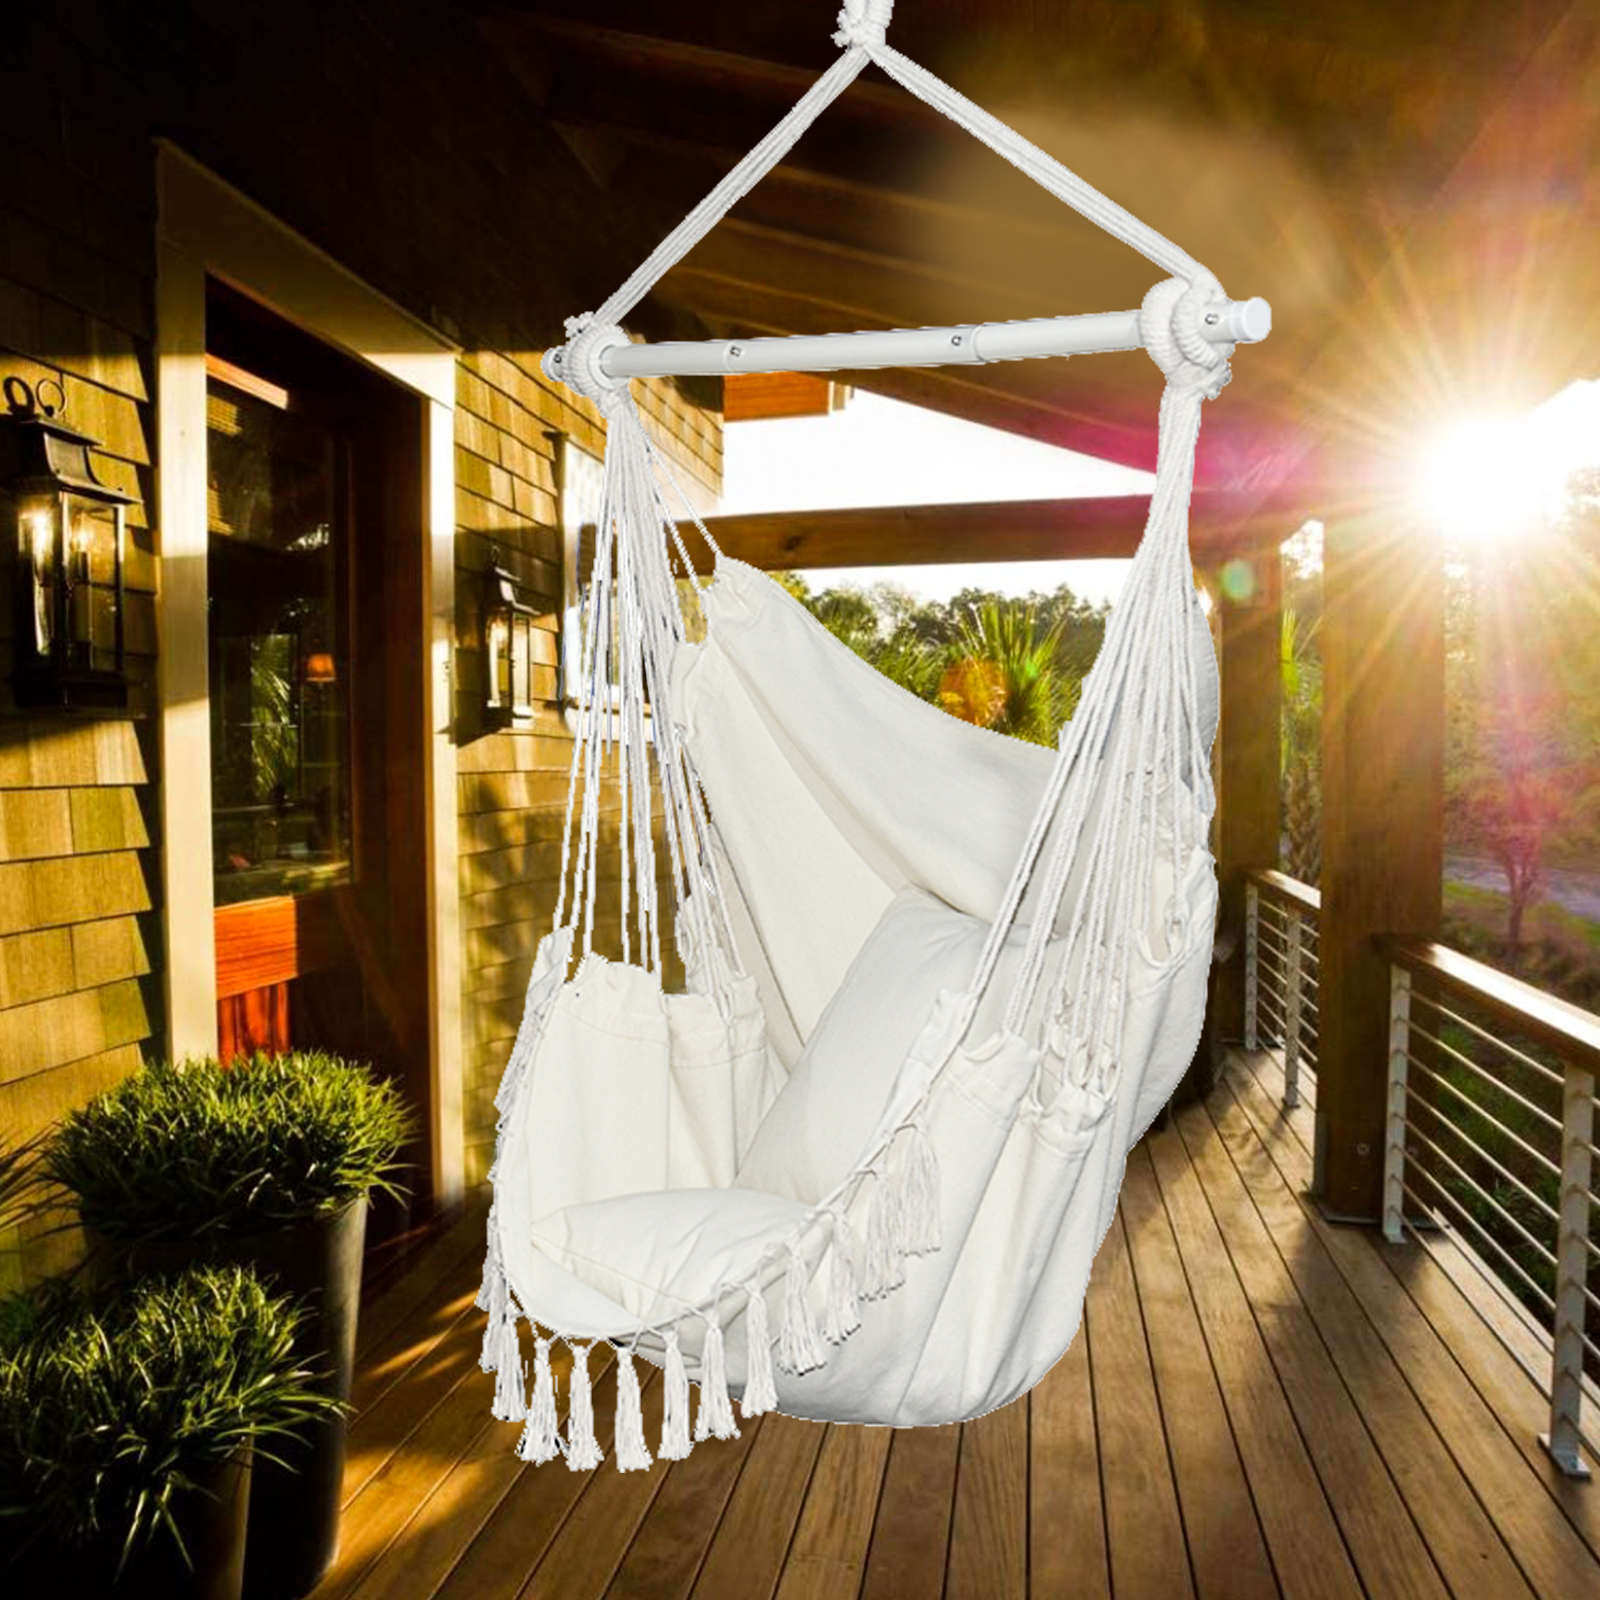 Hammock Chair Hanging Rope Swing, Hammock Chair Swing with Detachable Support Bar, 2 Seat Cushions & Carry Bag, Hanging Swing Chair for Home Bedroom Patio Deck Yard Garden, Support up 330 lbs, B021 - image 1 of 10